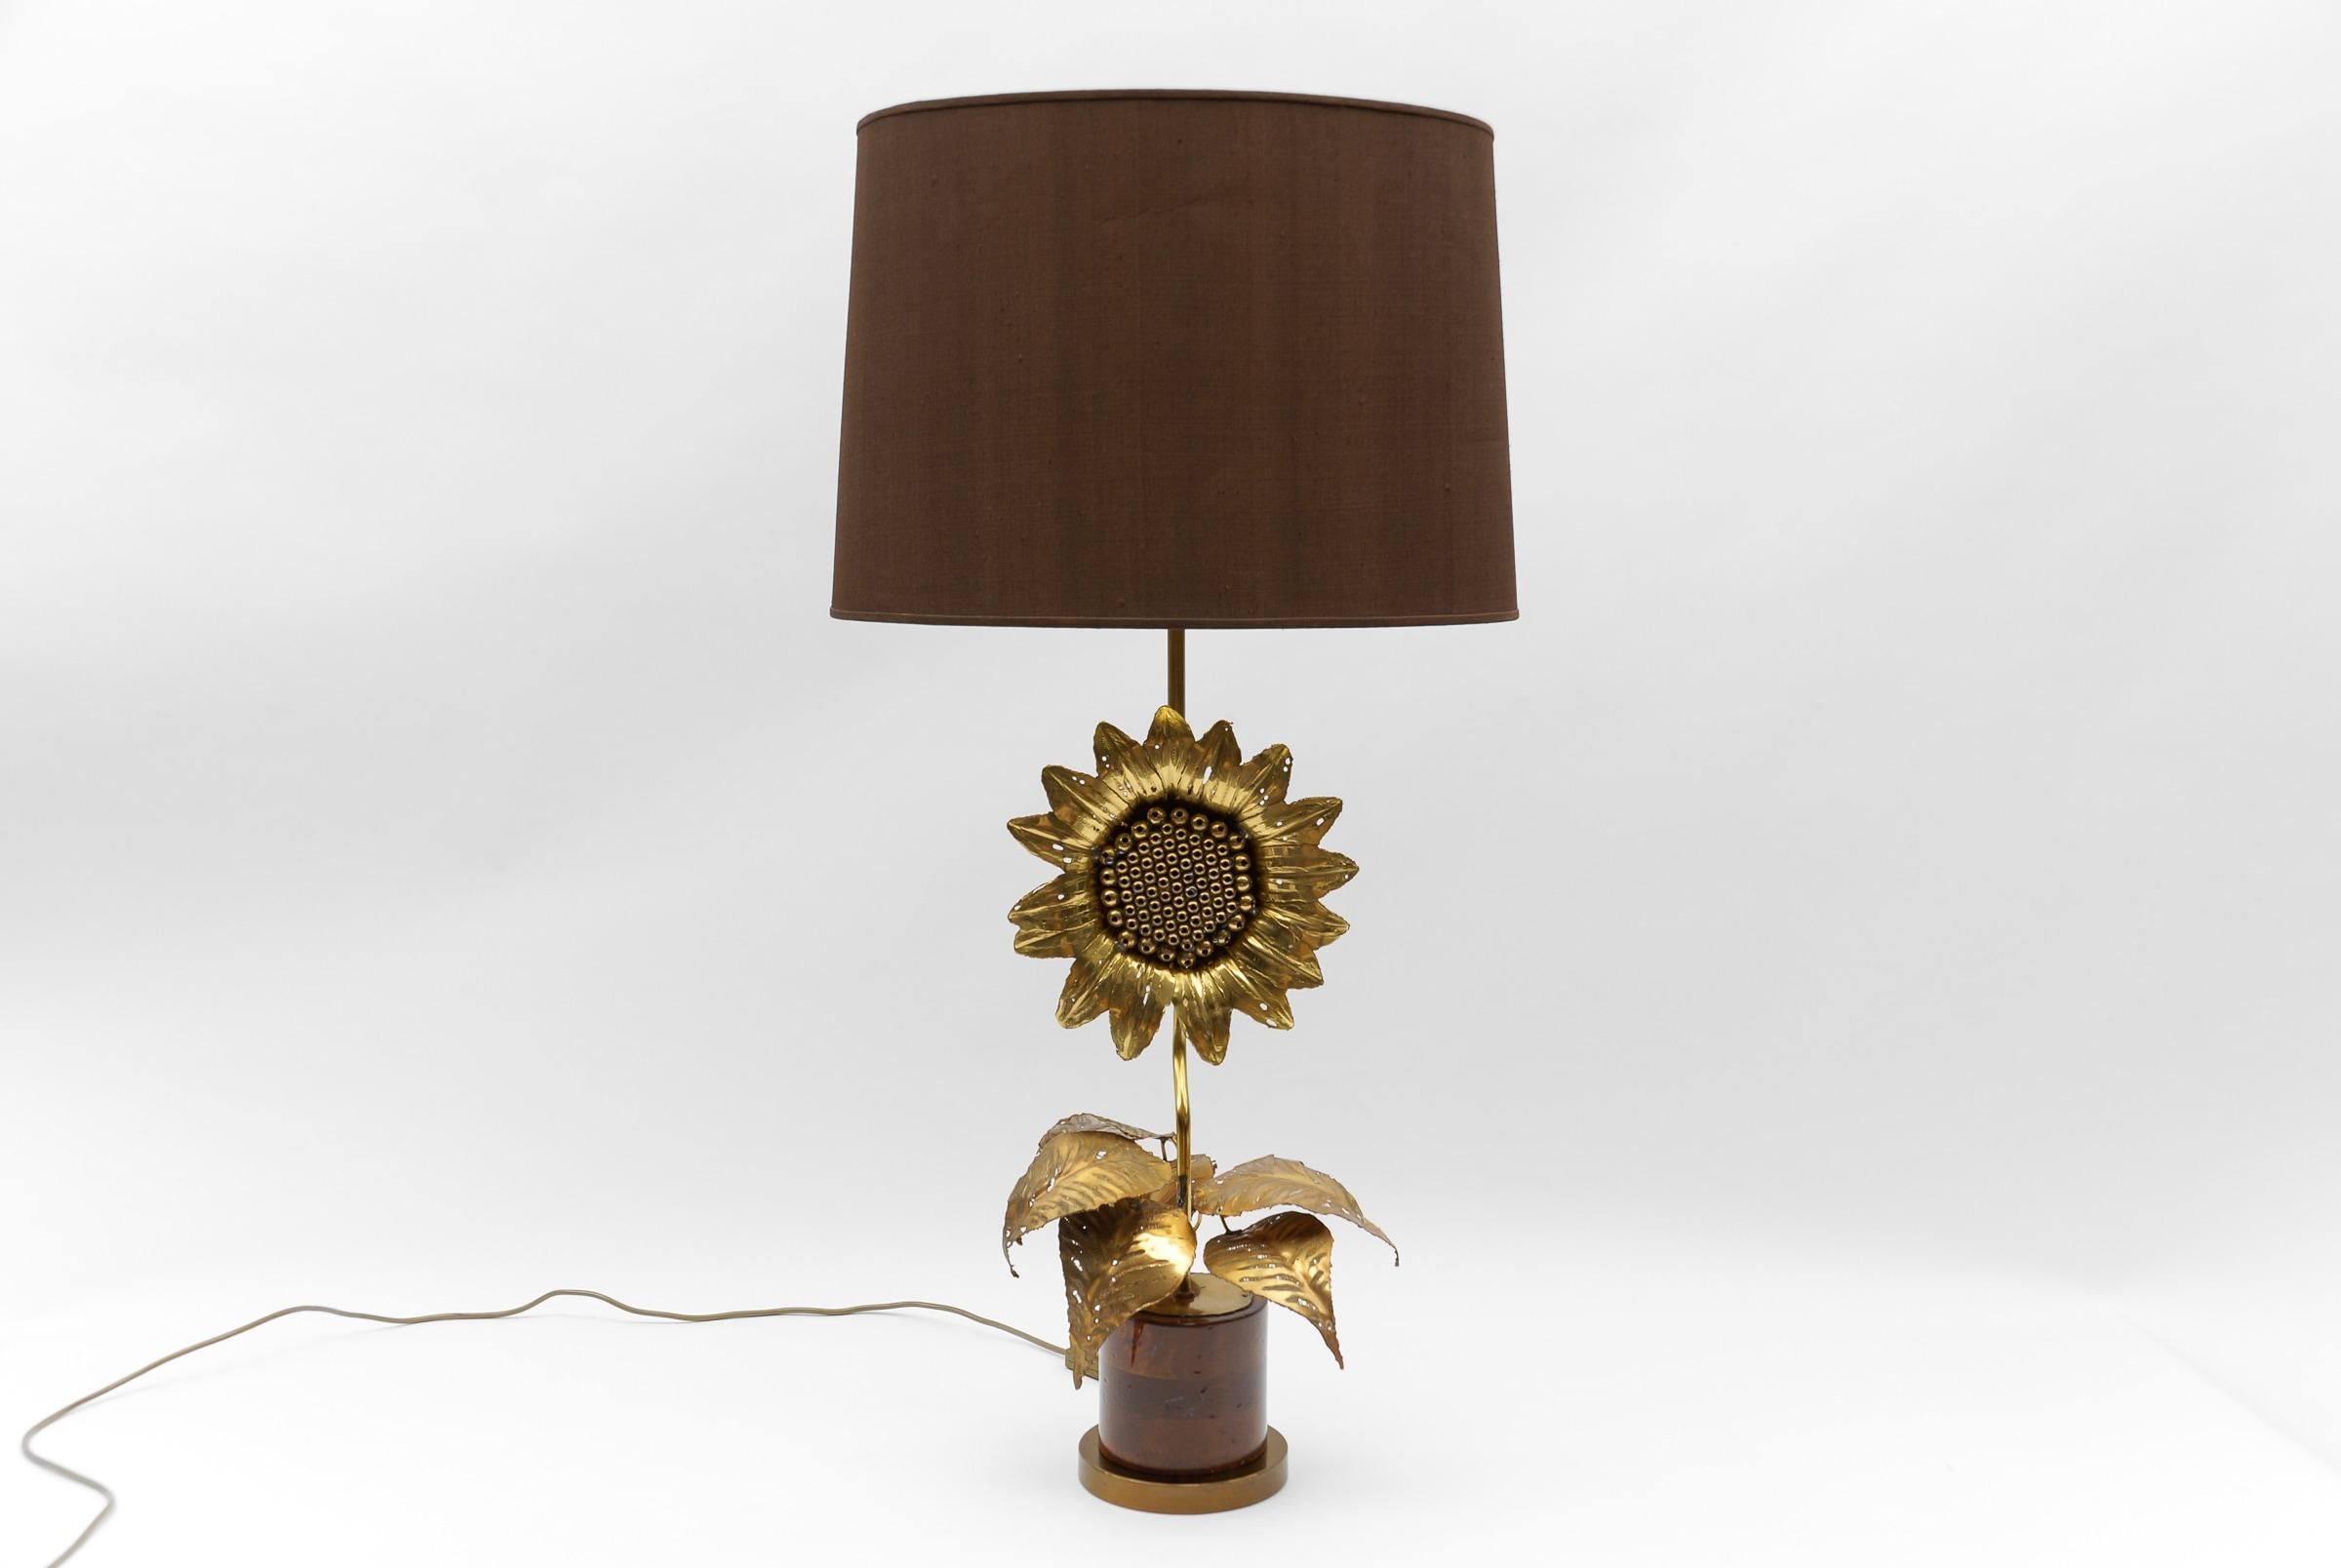 Mid-Century Modern Sunflower Table Lamp made in Brass and Wood, 1960s

Dimension with lamp shade:
Height: 37.00 in (93 cm)
Width: 18.50 in (47 cm)
Depth: 11.81 in (30 cm)

Dimension without lamp shade:
Height: 27.95 in (71 cm)
Width: 11.41 in (29